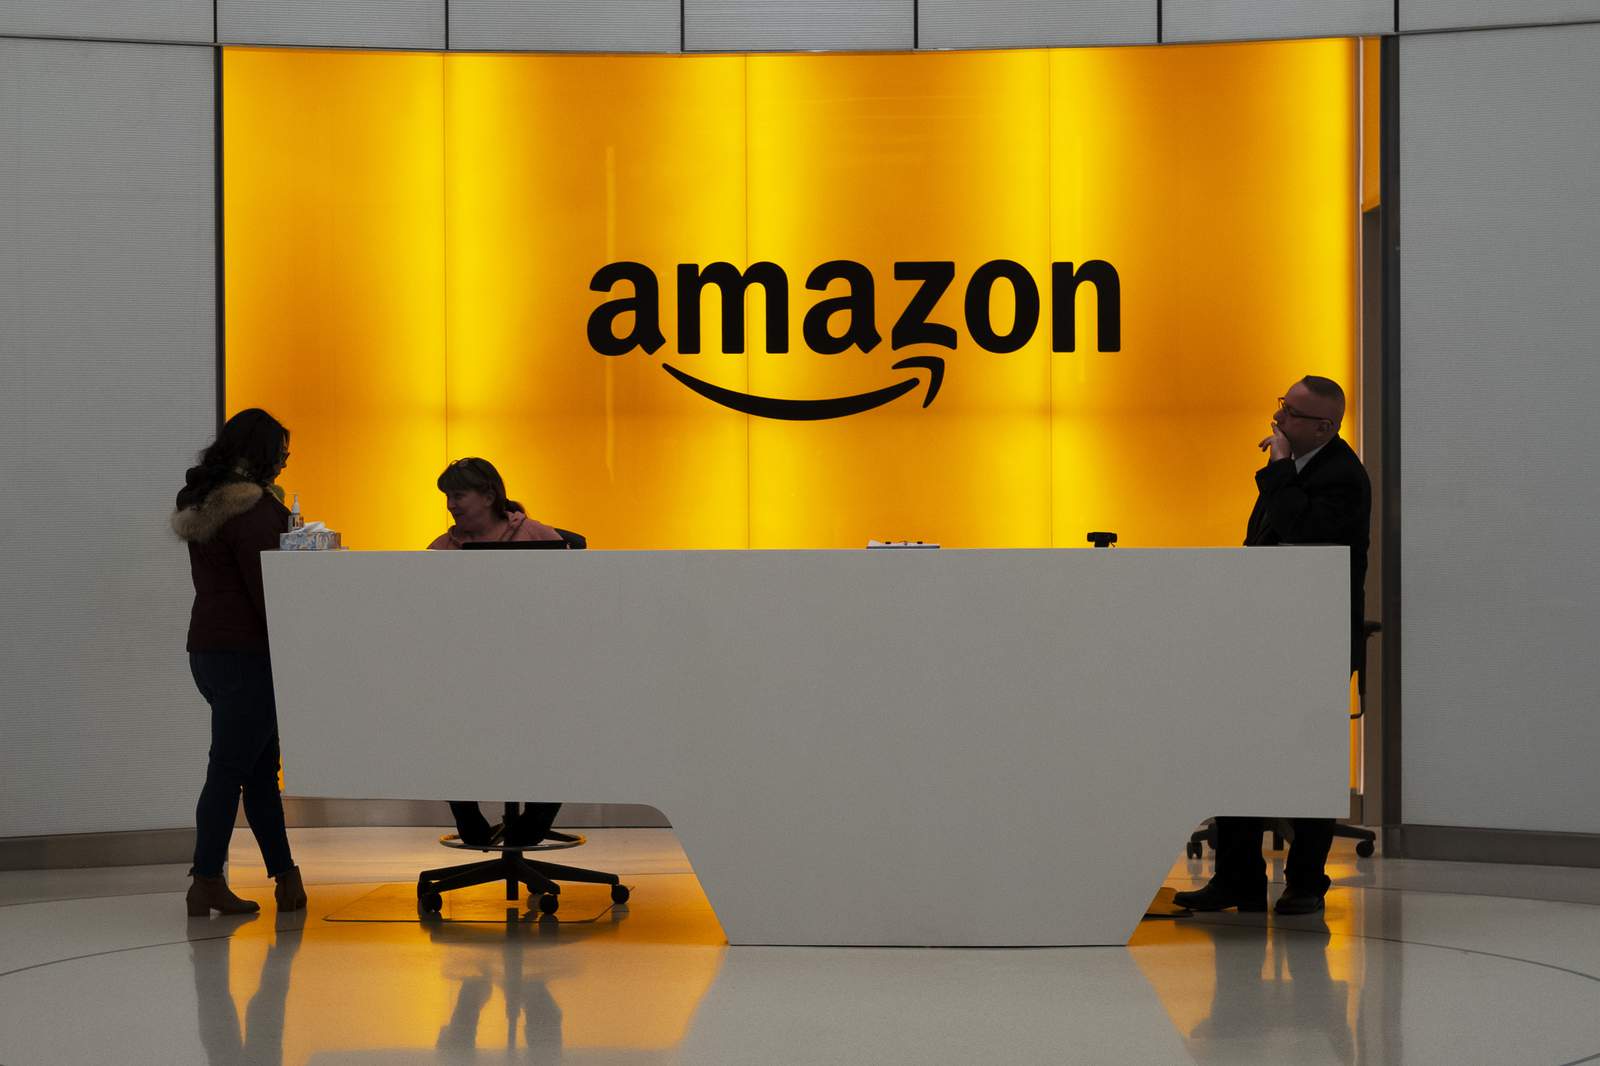 Dems draw on civil rights history to push Amazon union vote